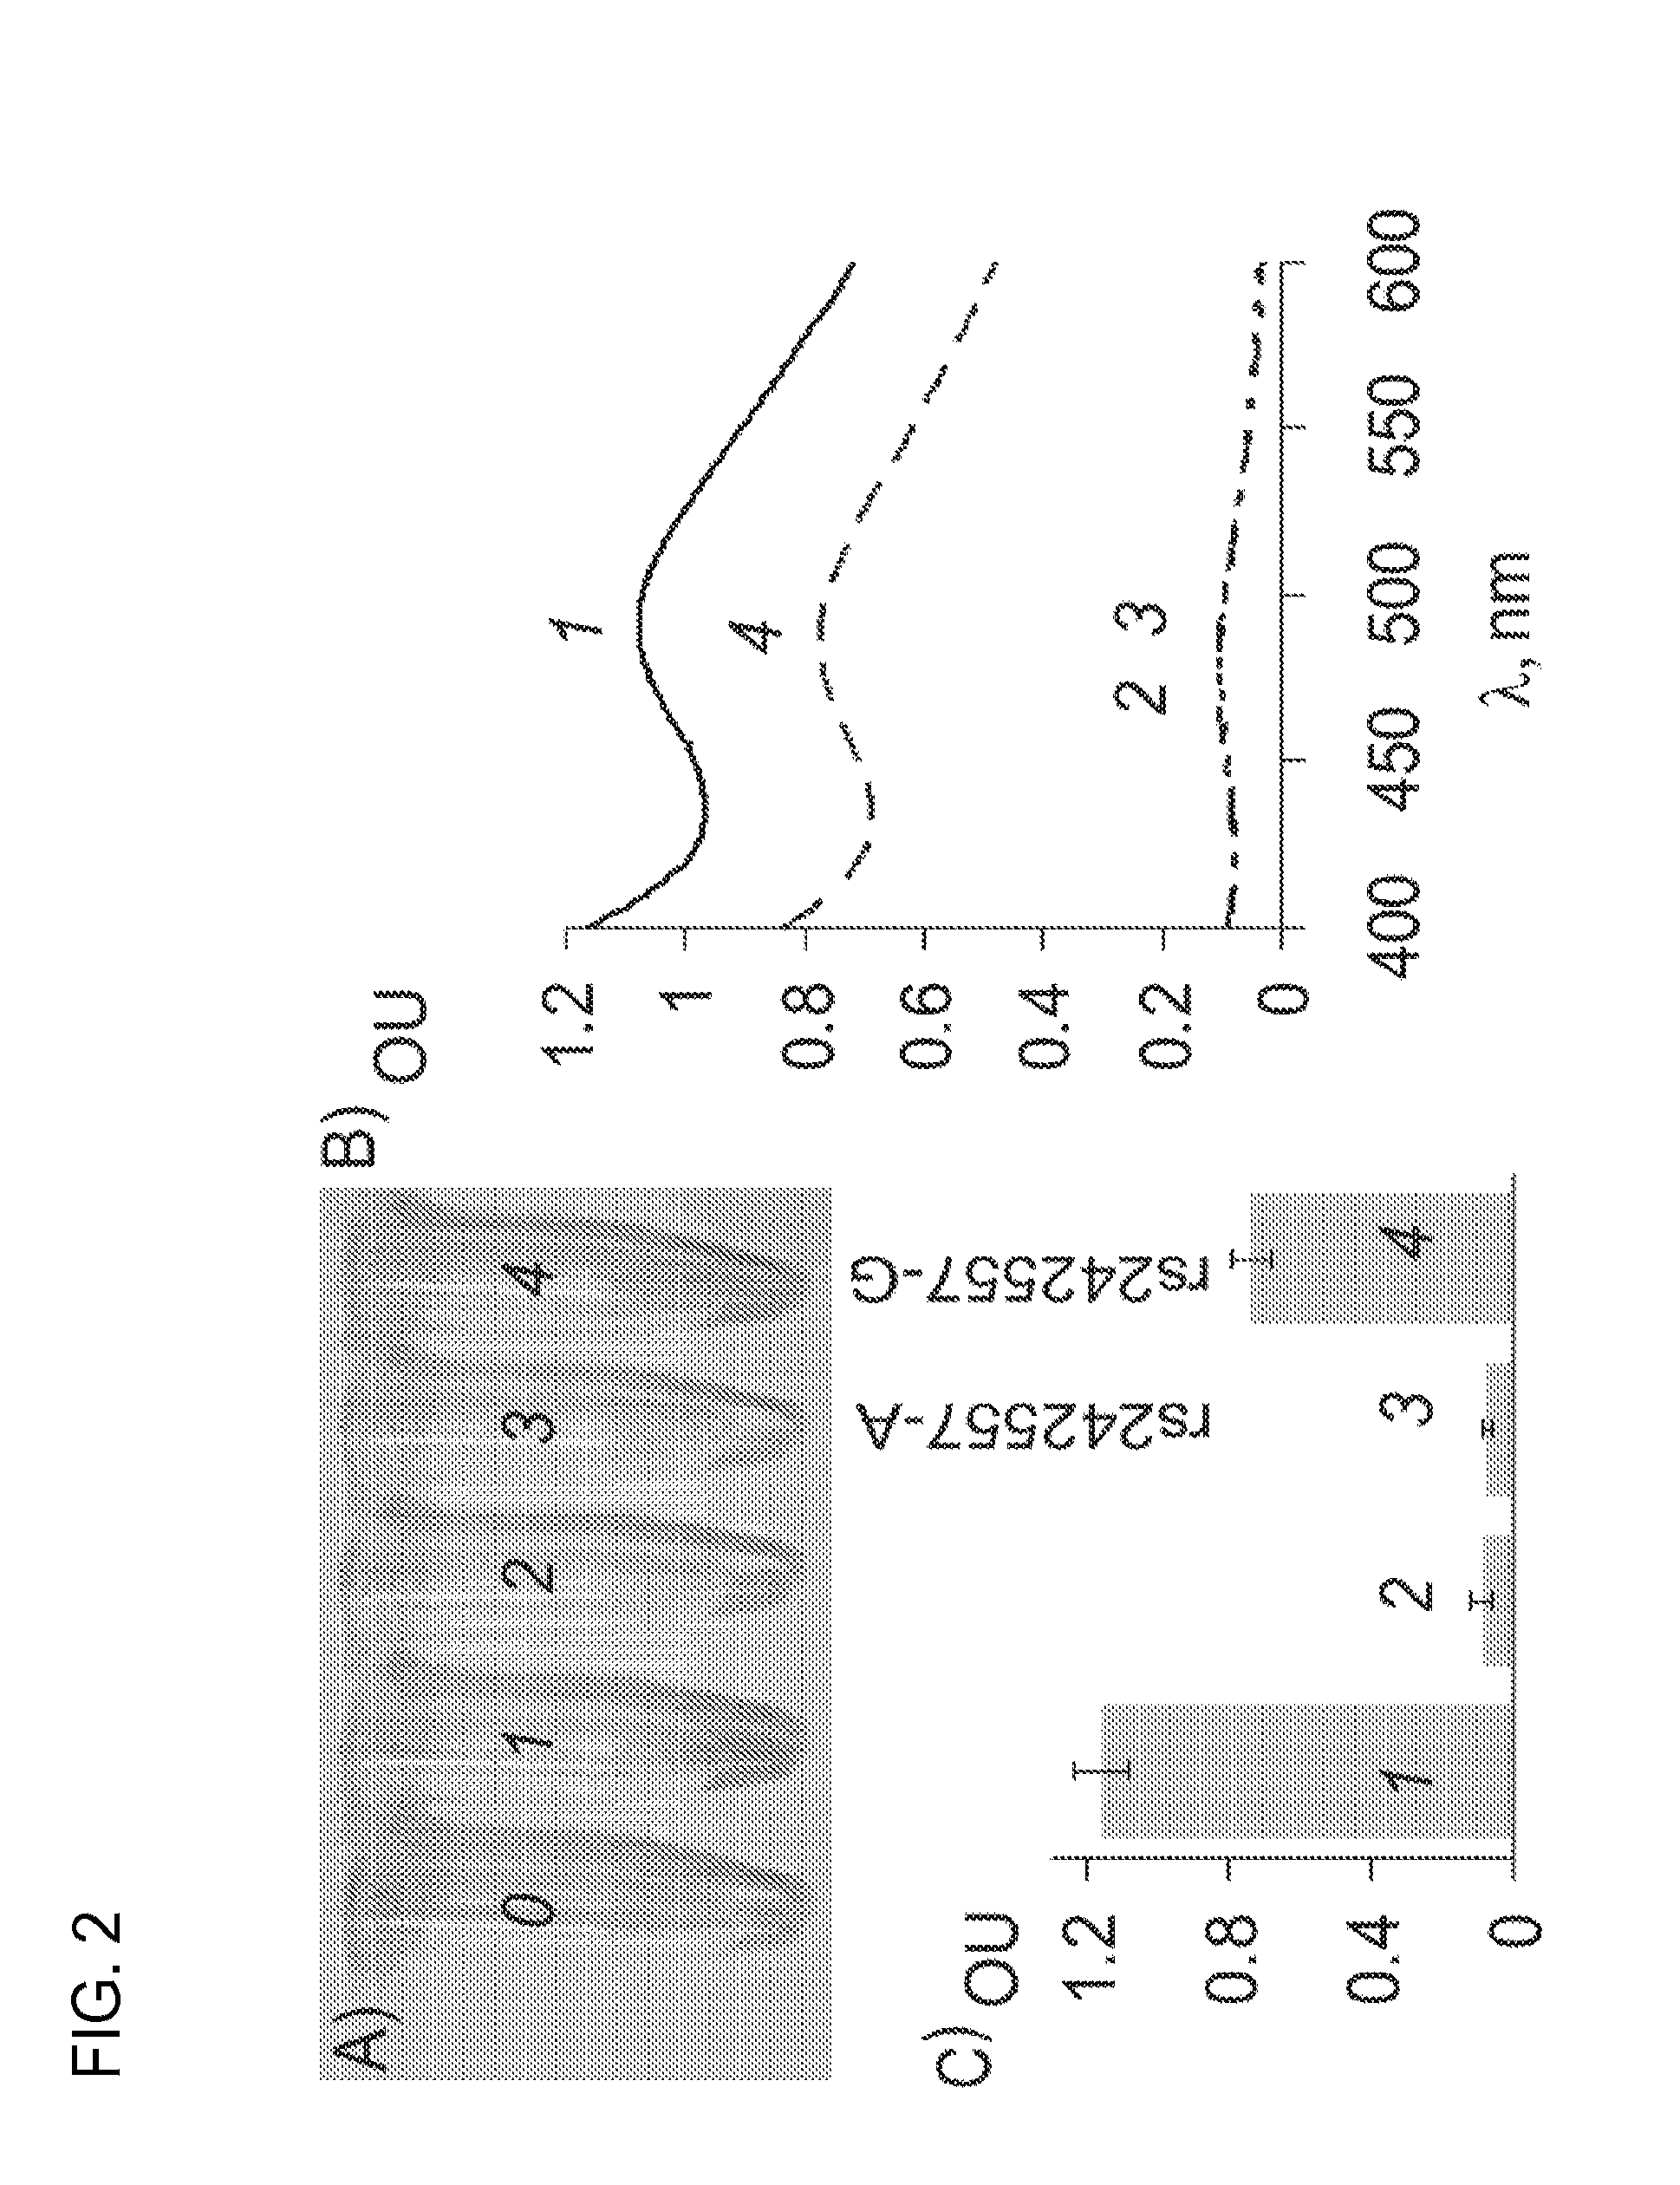 Split DNA Enzyme for Visual Single Nucleotide Polymorphism Typing